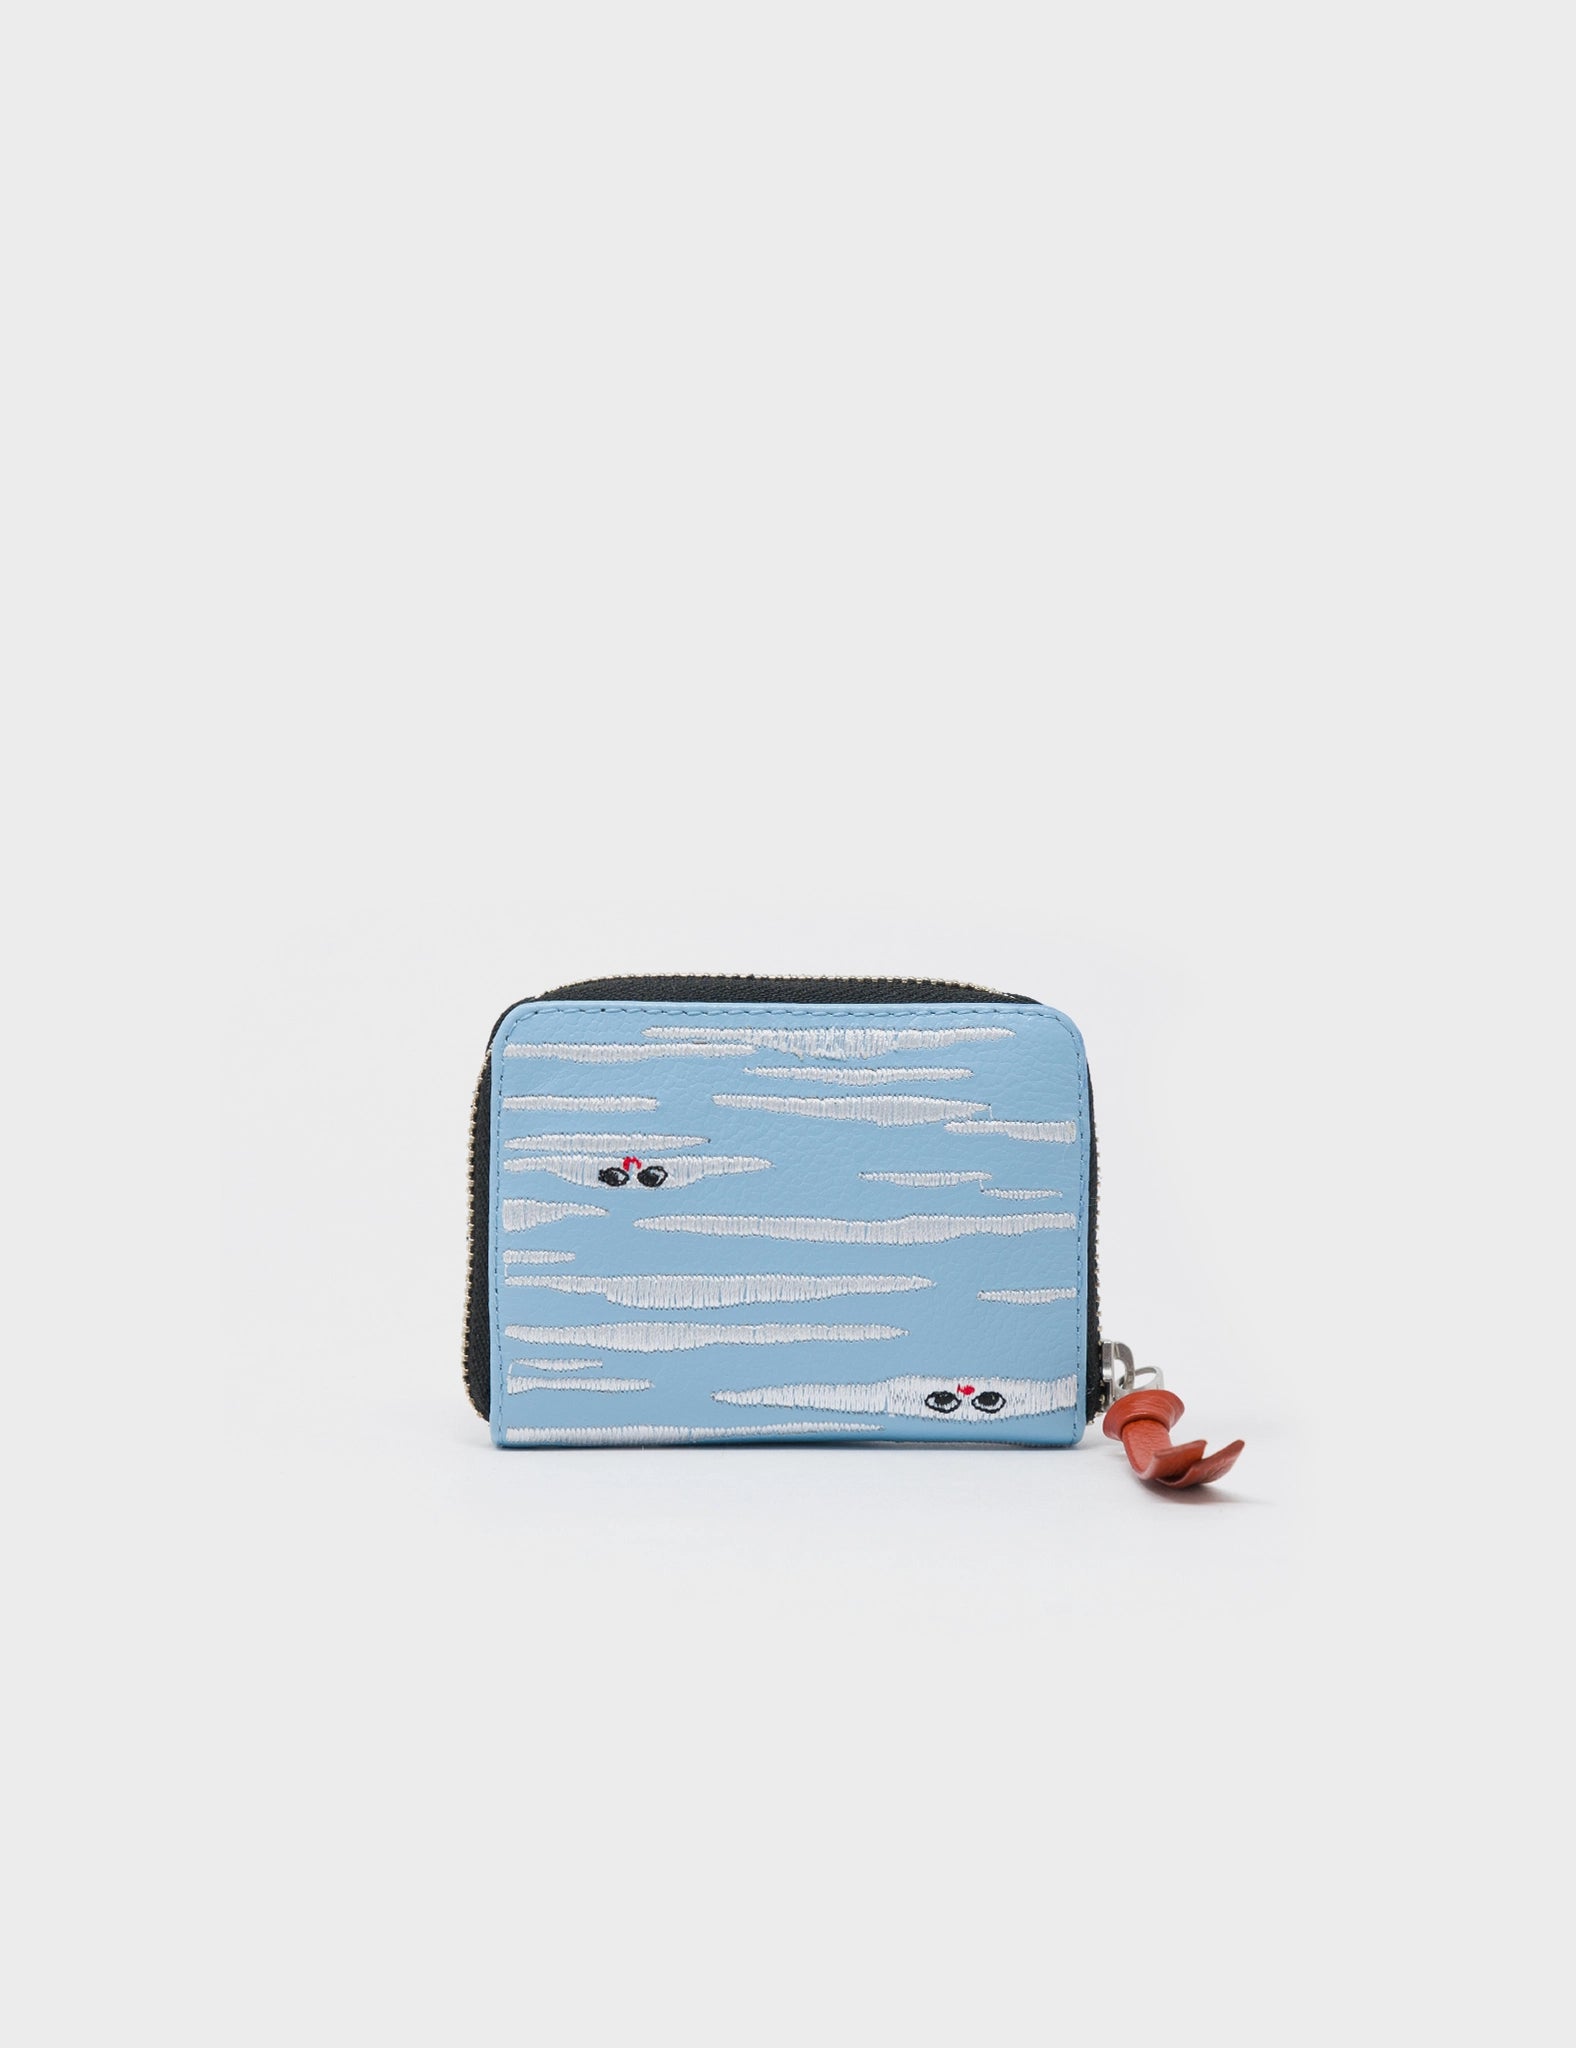 Blue Leather Zip Around Wallet - Clouds Embroidery - Back